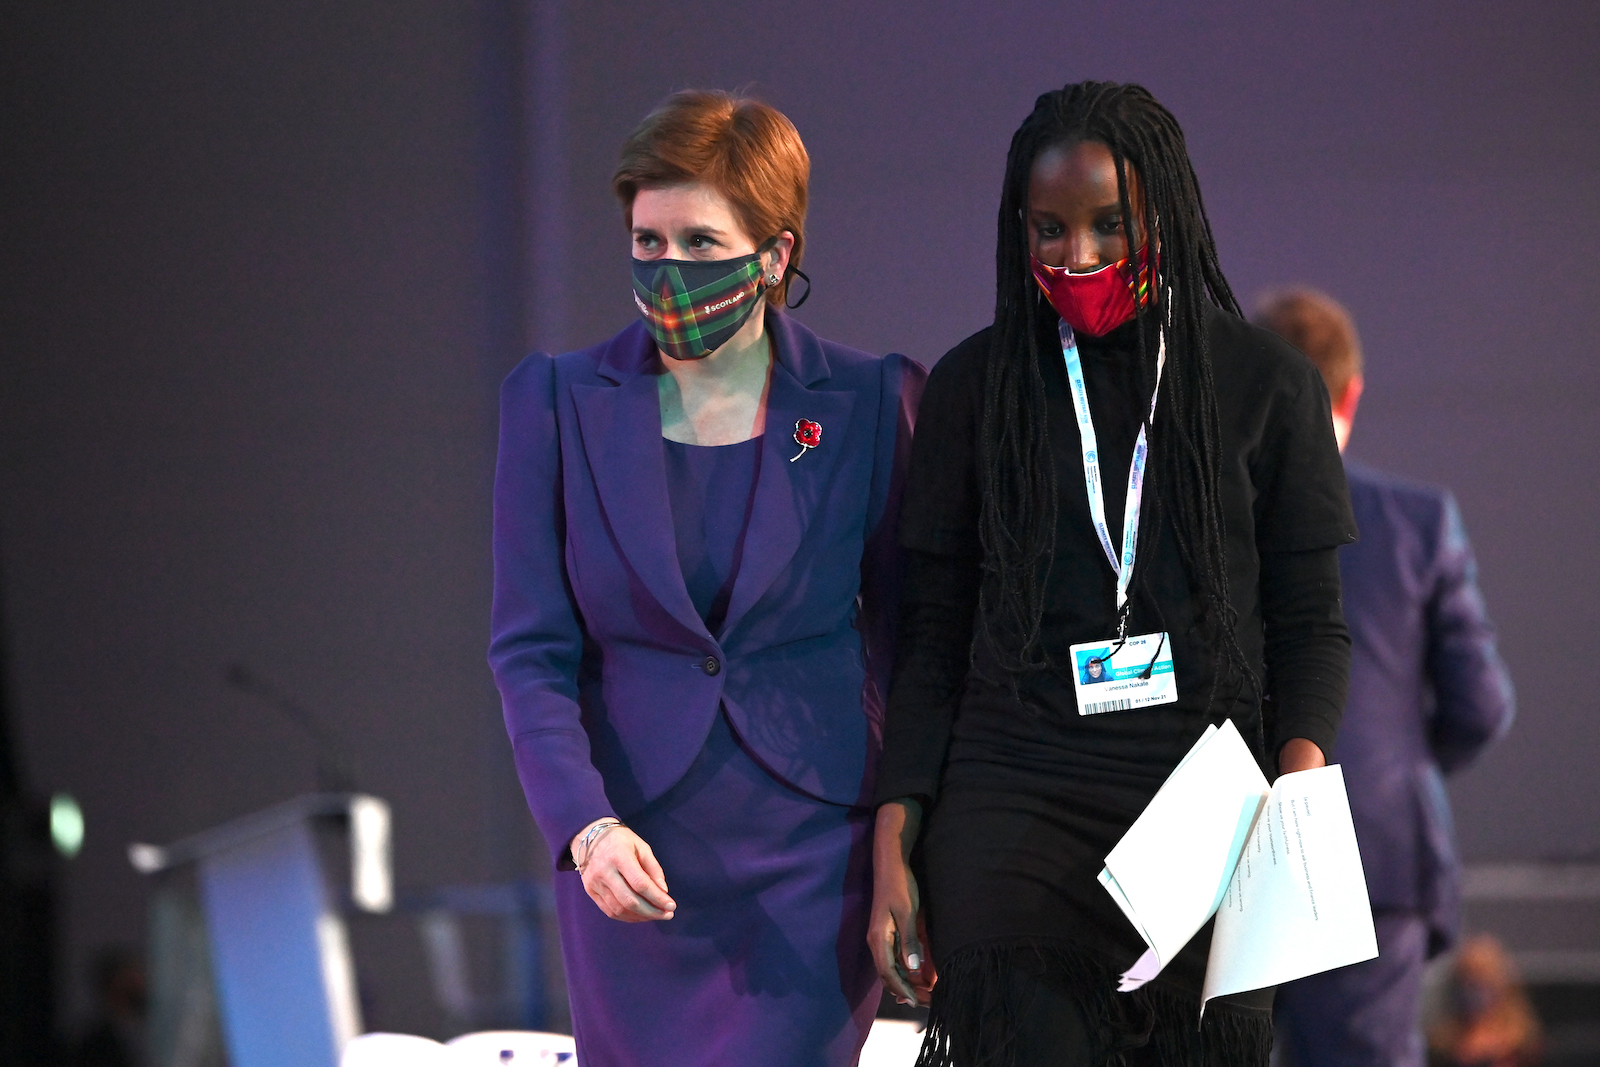 two women, one in a purple suit, the other in black, walk through a conference room